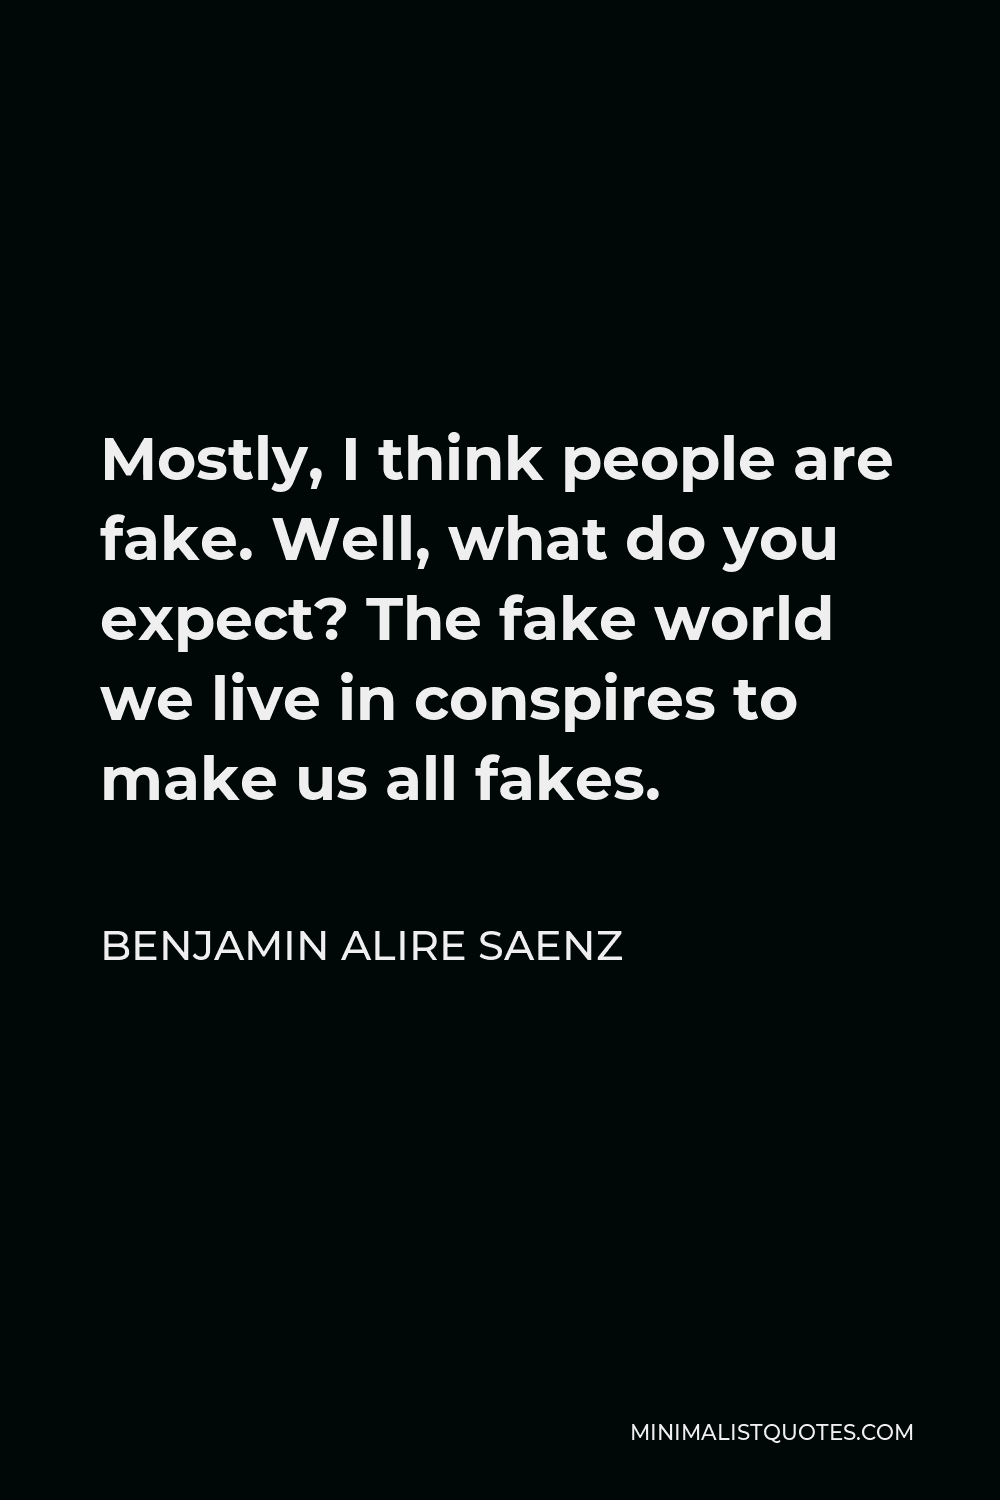 Benjamin Alire Saenz Quote - Mostly, I think people are fake. Well, what do you expect? The fake world we live in conspires to make us all fakes.